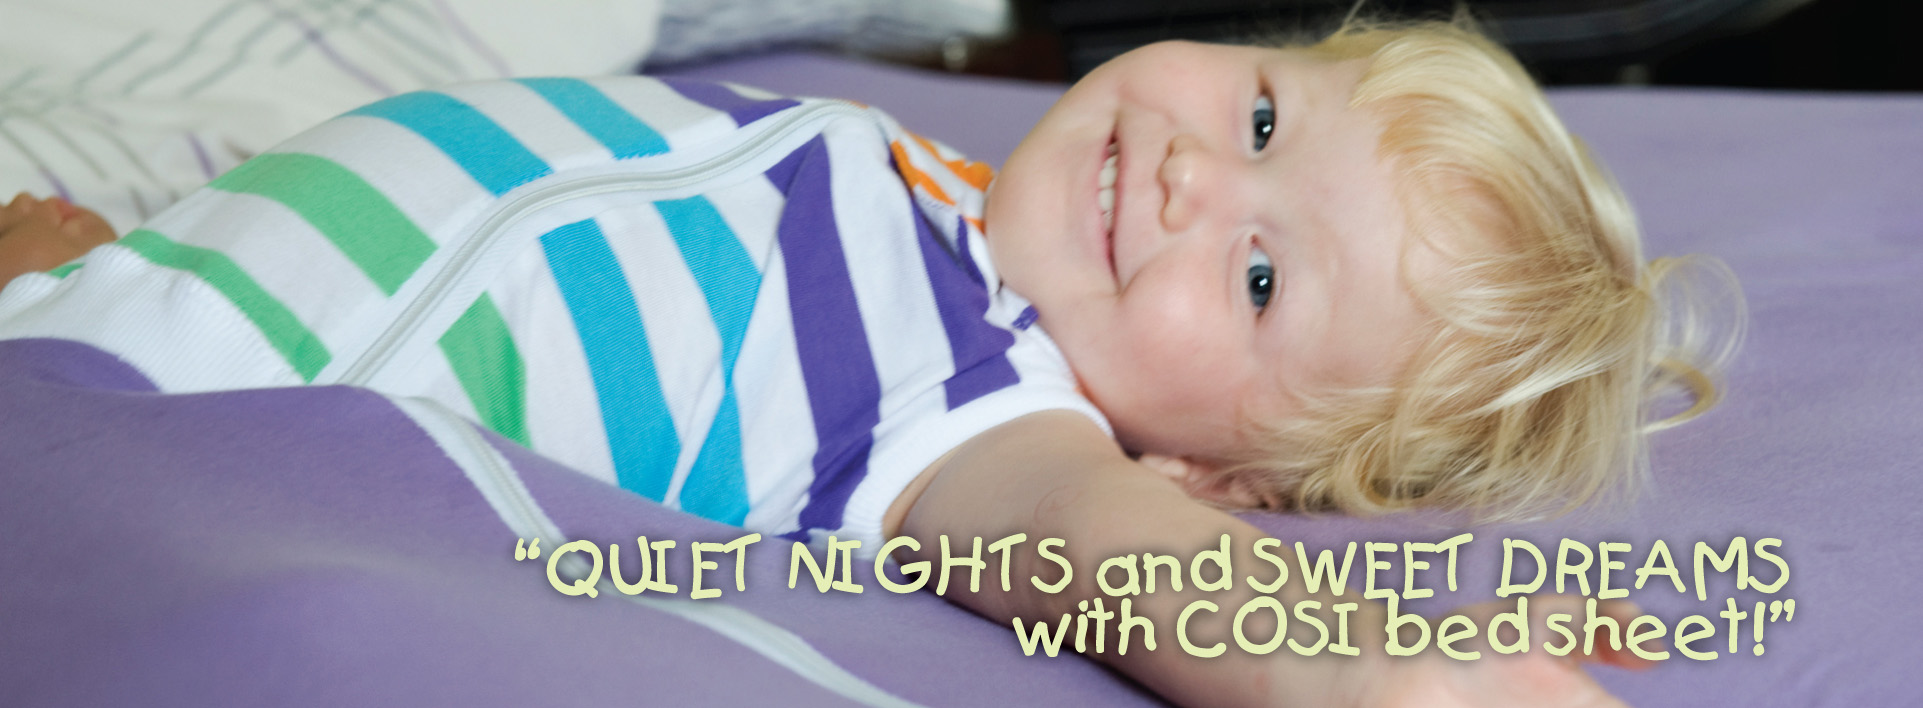 little blond boy lying down in a cosi blanket smiling at camera